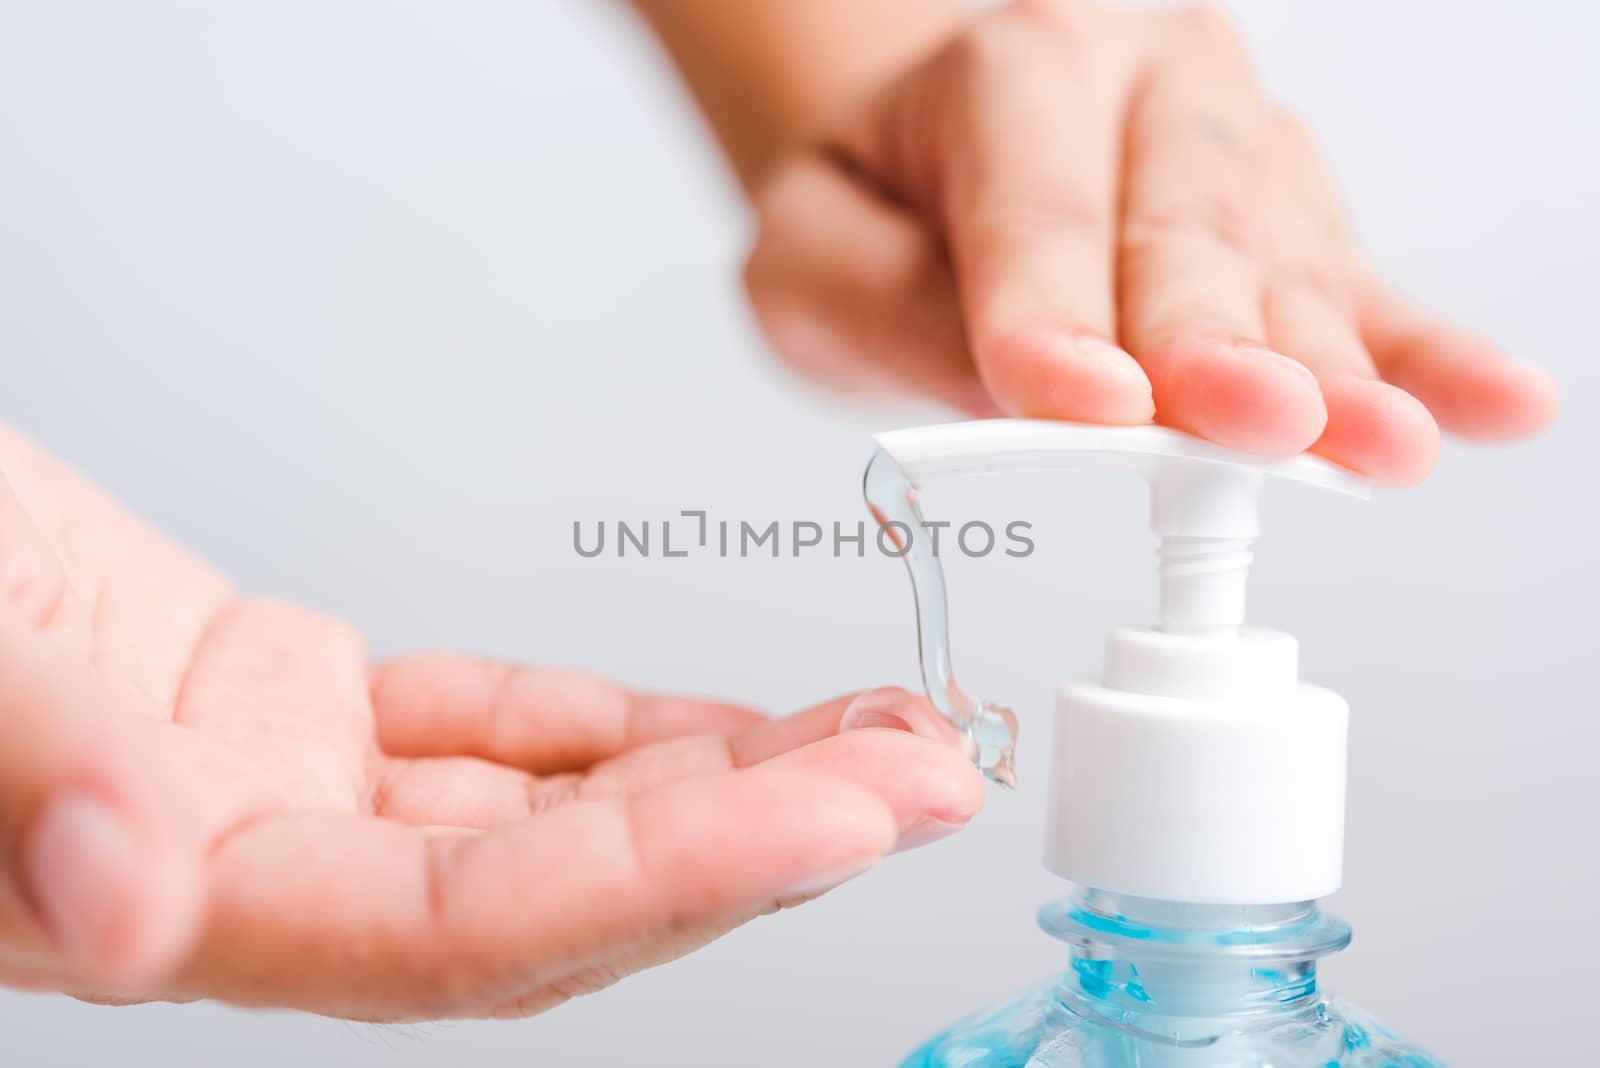 Close up Asian young woman applying press dispenser sanitizer alcohol gel pump to hand wash cleaning, hygiene prevention COVID-19 or coronavirus protection concept, isolated on white background